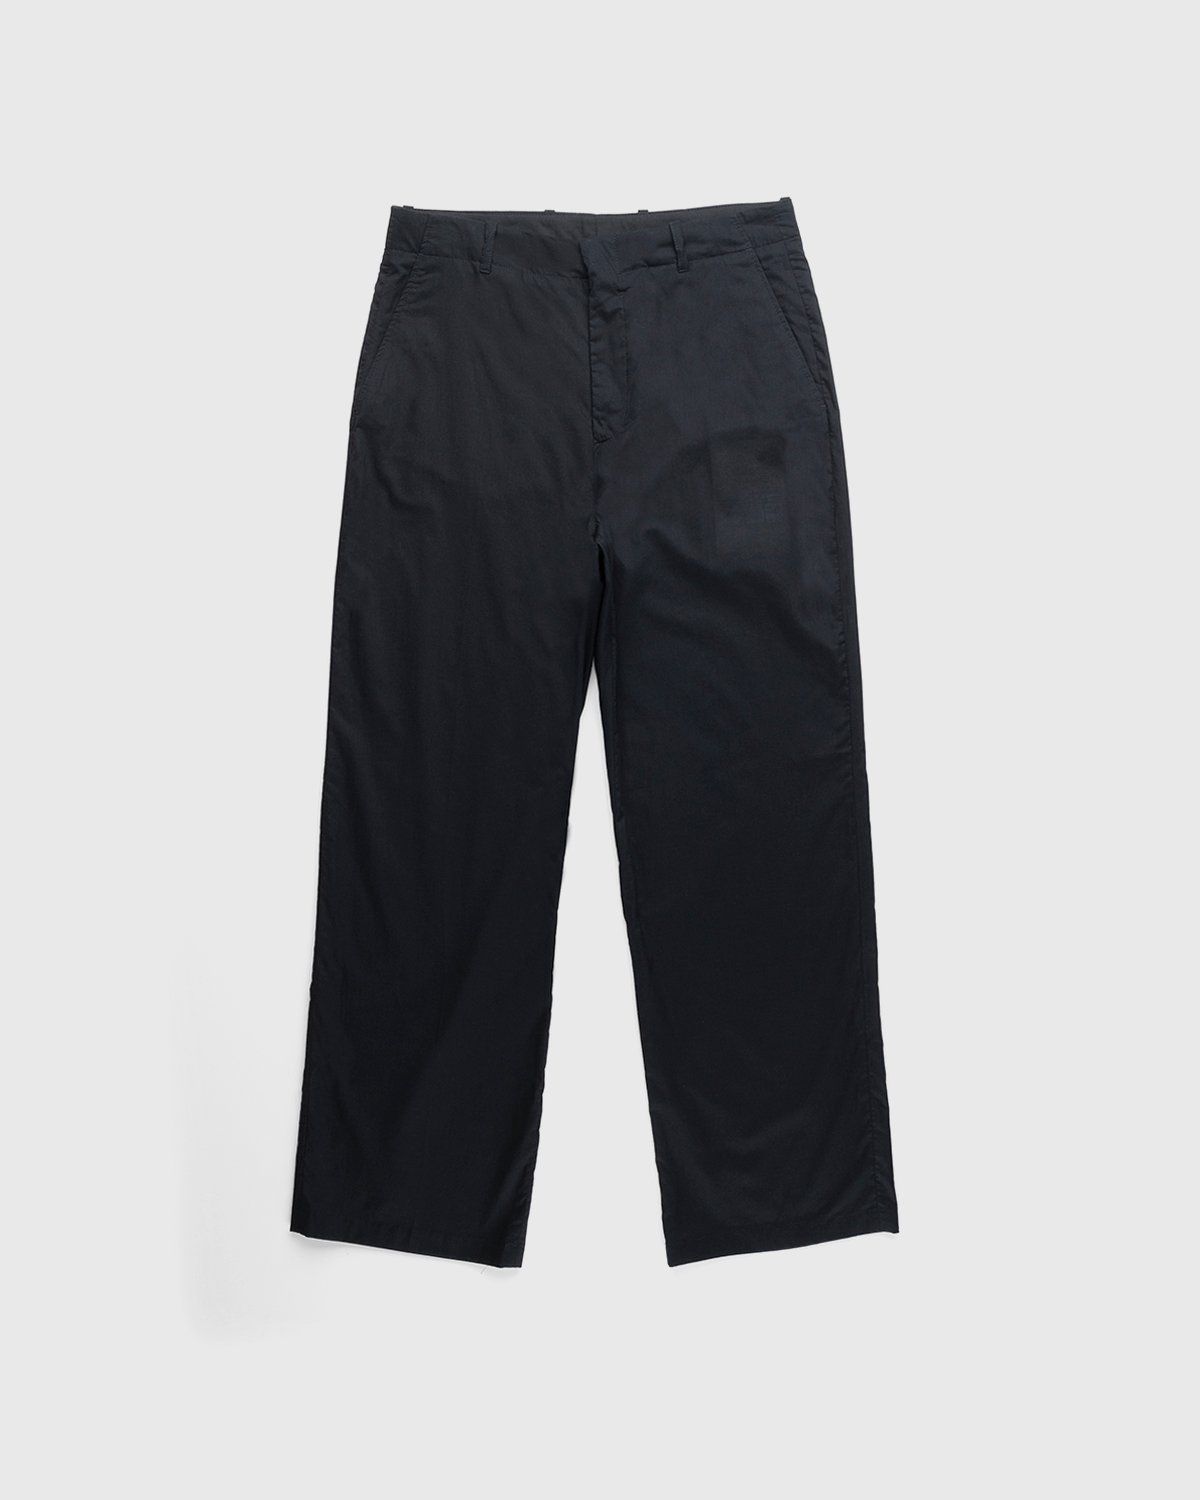 Our Legacy – Borrowed Chino Black Voile - Chinos - Black - Image 1